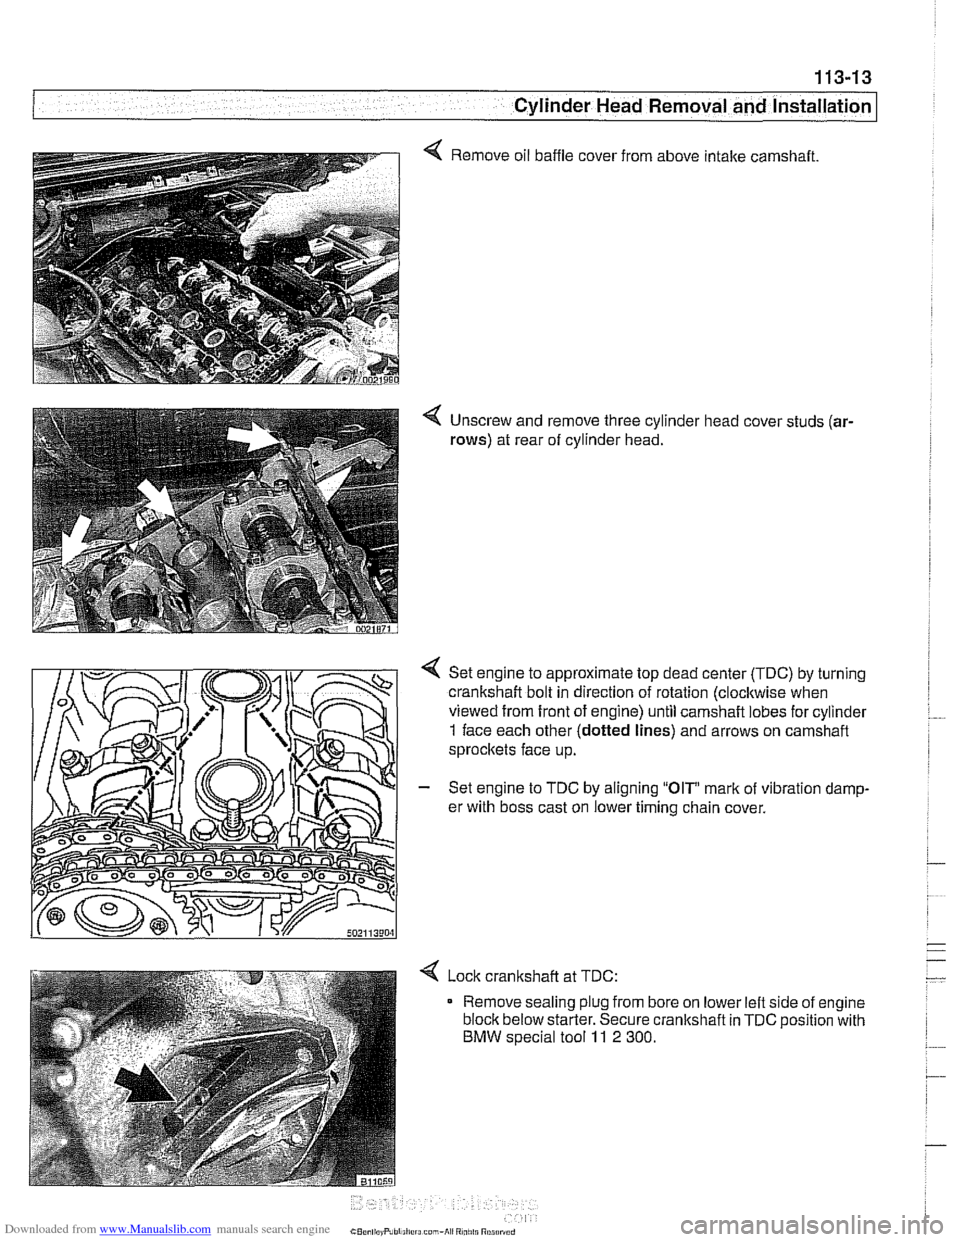 BMW 540i 2000 E39 Workshop Manual Downloaded from www.Manualslib.com manuals search engine 
- - , -. I Cylinder Head Removal and lnstallatio~ 
4 Remove oil baffle  cover from  above intake camshaft. 
4 Unscrew  and remove  three cylin